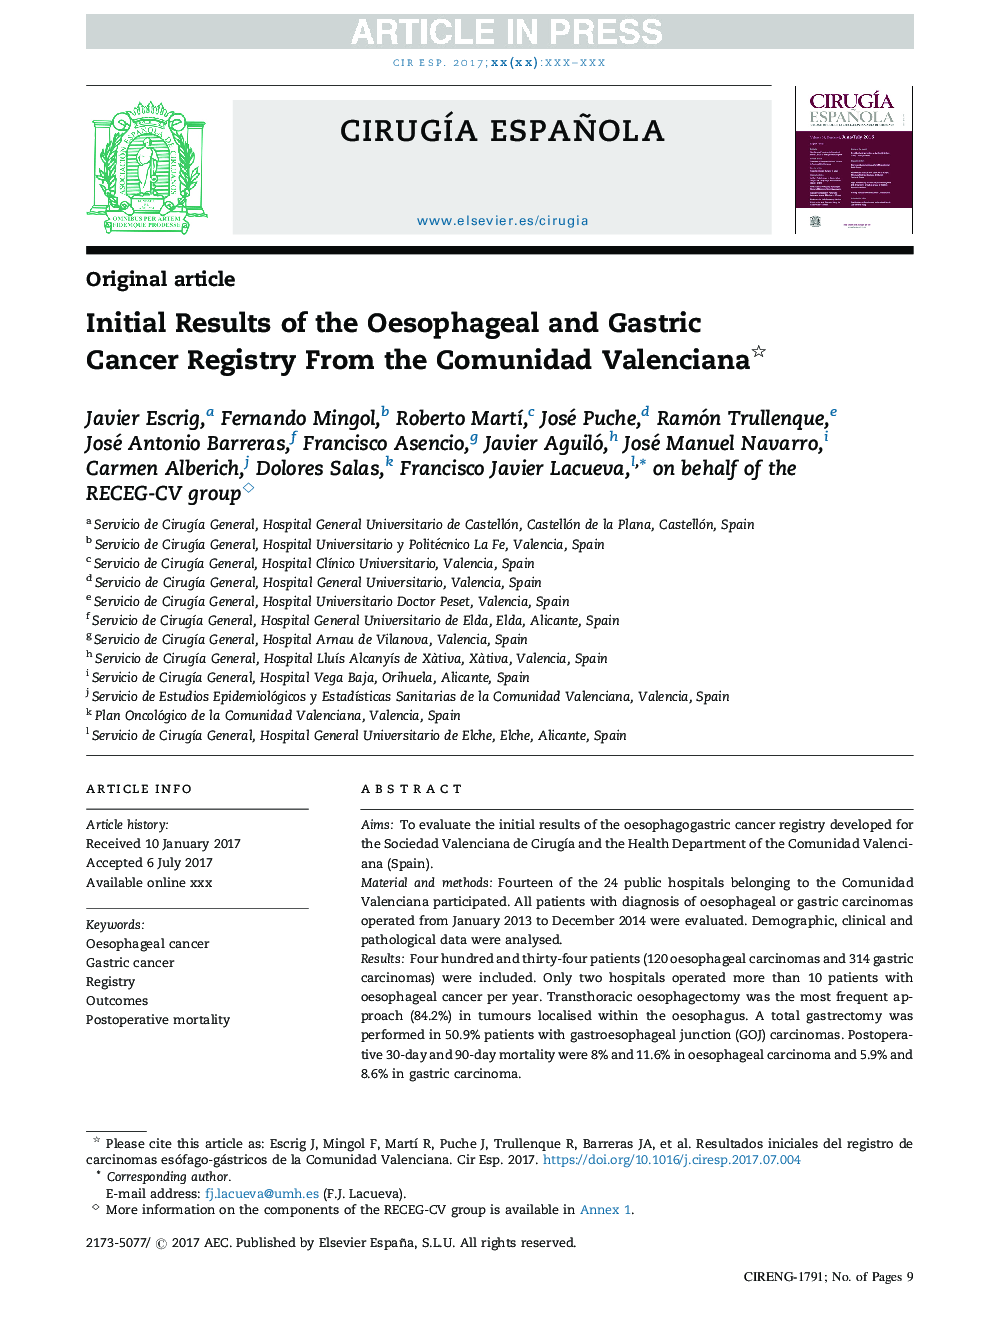 Initial Results of the Oesophageal and Gastric Cancer Registry From the Comunidad Valenciana